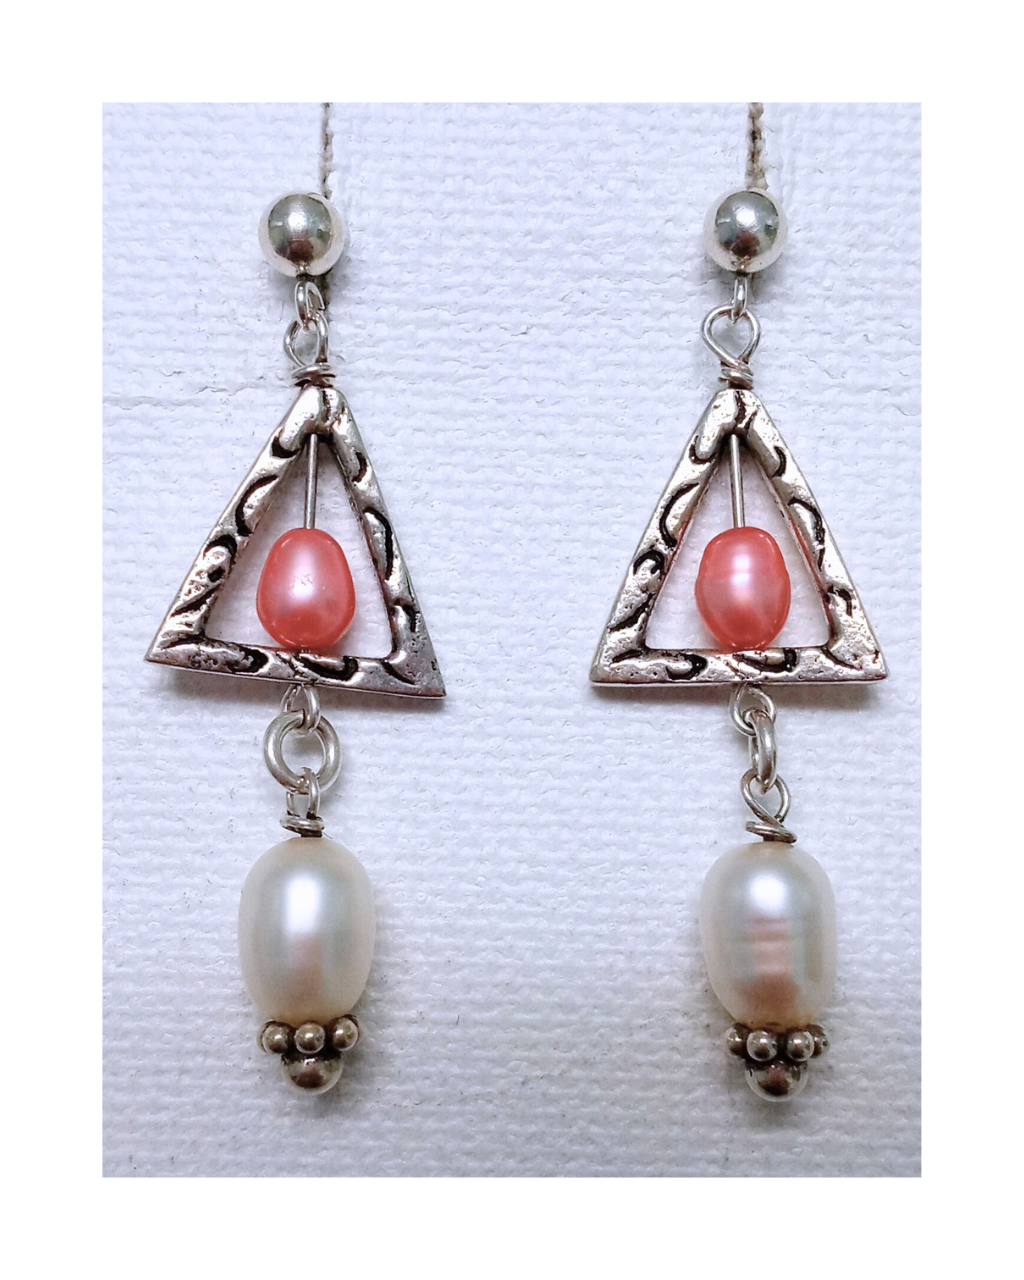 Sterling Bright Pink and White Pearls in Swivel Triangle Earrings 1 3/4"L X 5/8"W